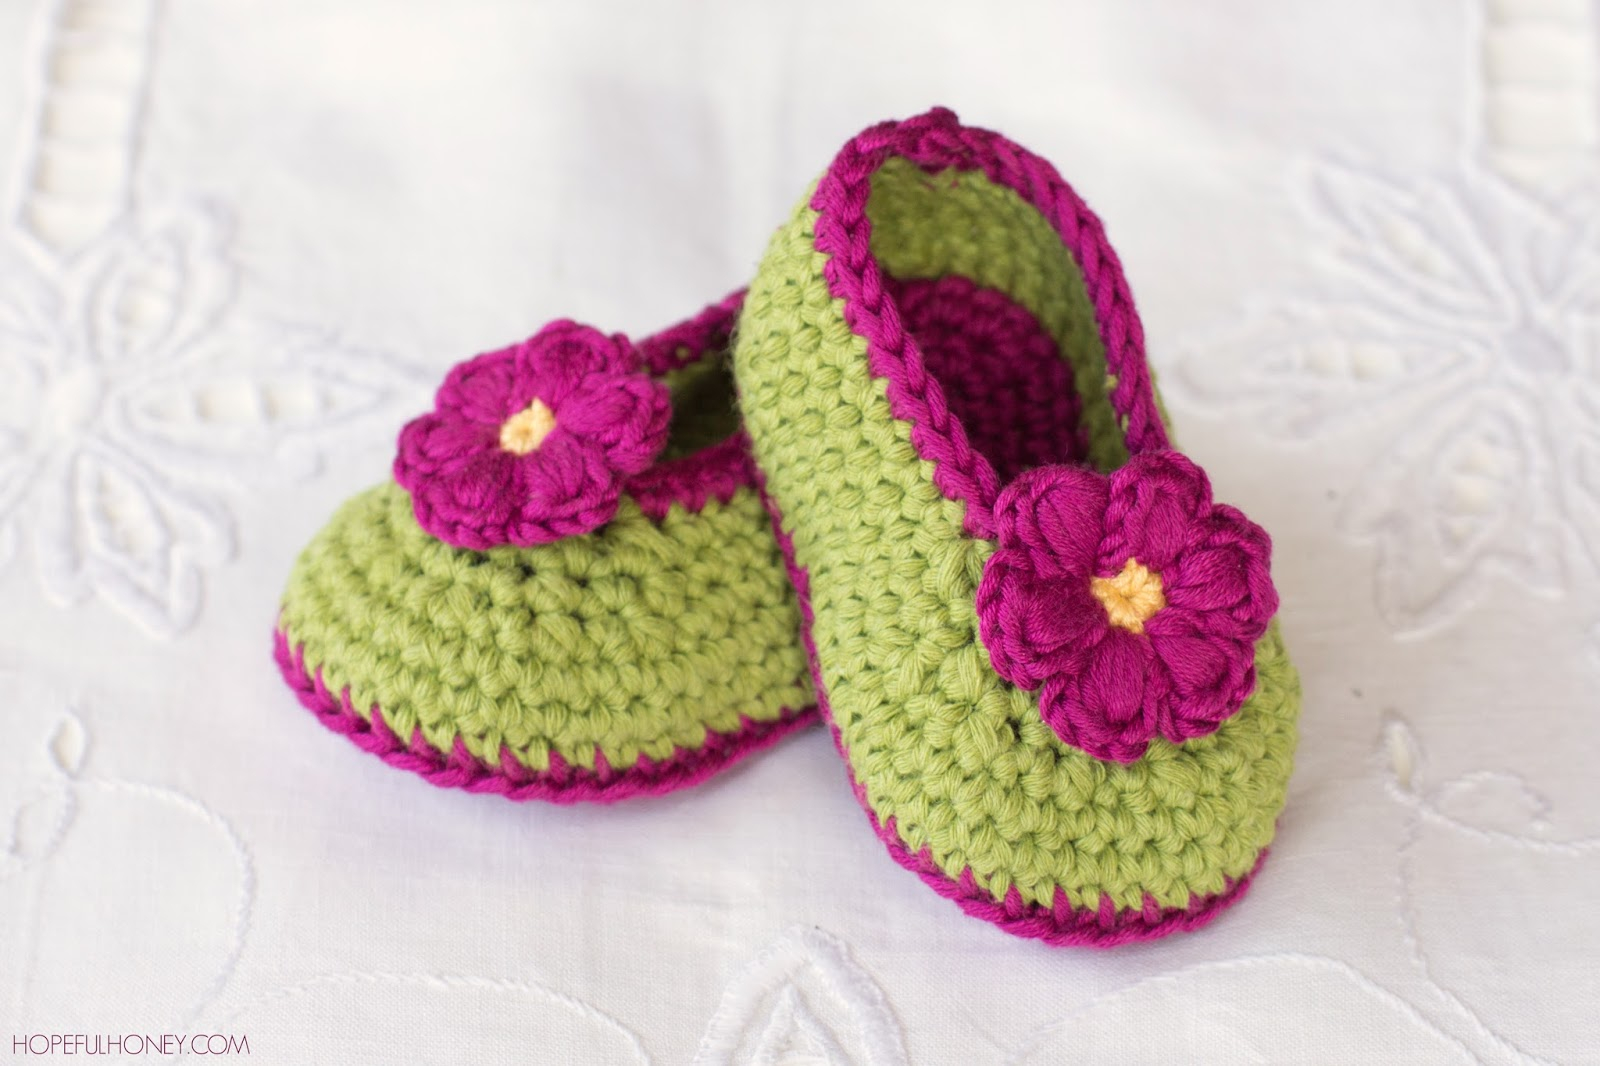 Baby Bootie Crochet Pattern Easy To Make Crochet Booties Crochet And Knitting Patterns 2019